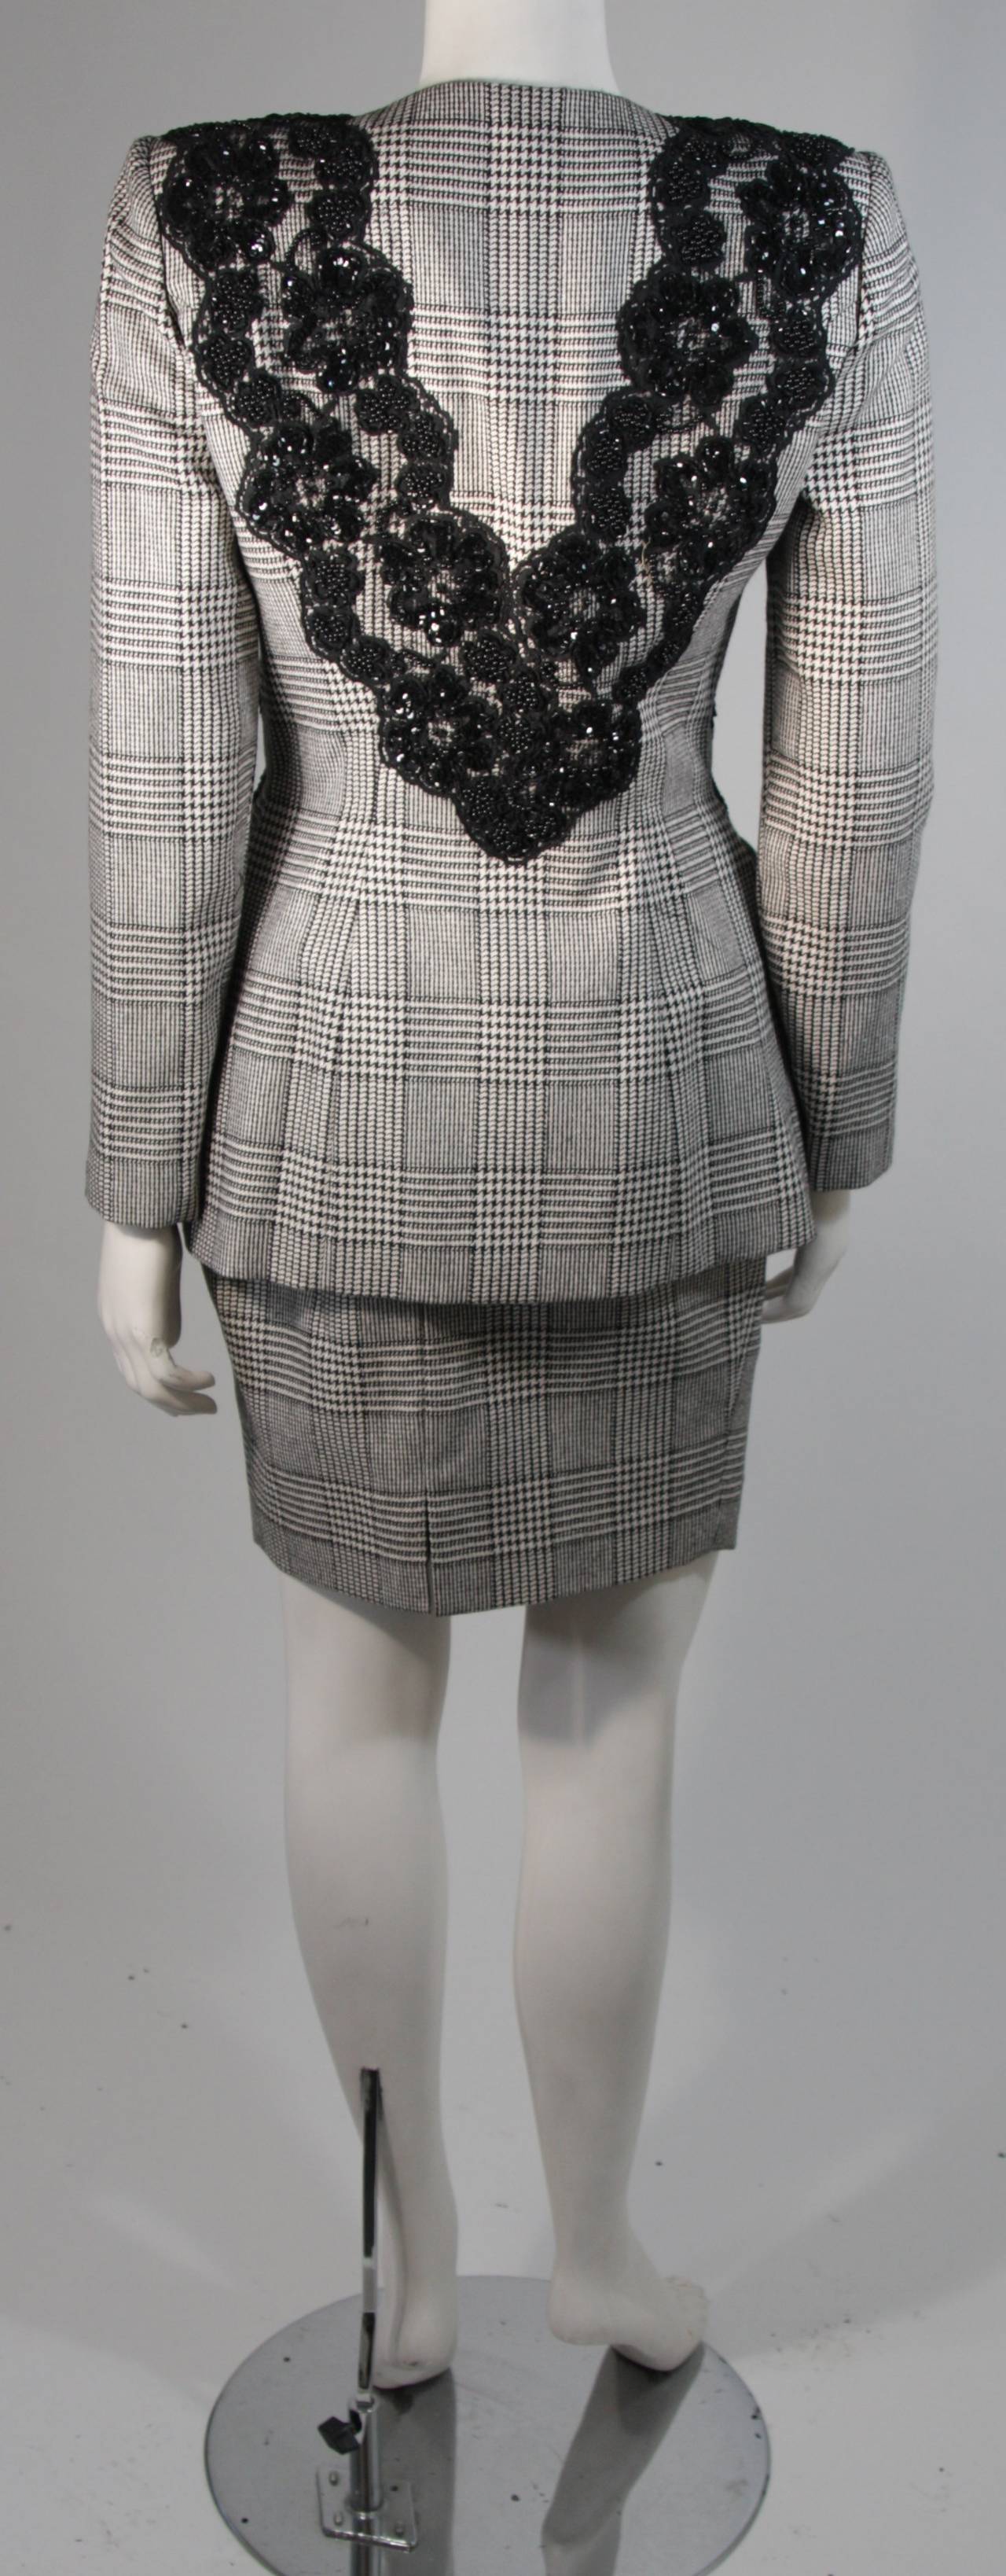 Vicky Tiel Black and White Houndstooth Print Skirt Suit With Lace Size 40 3